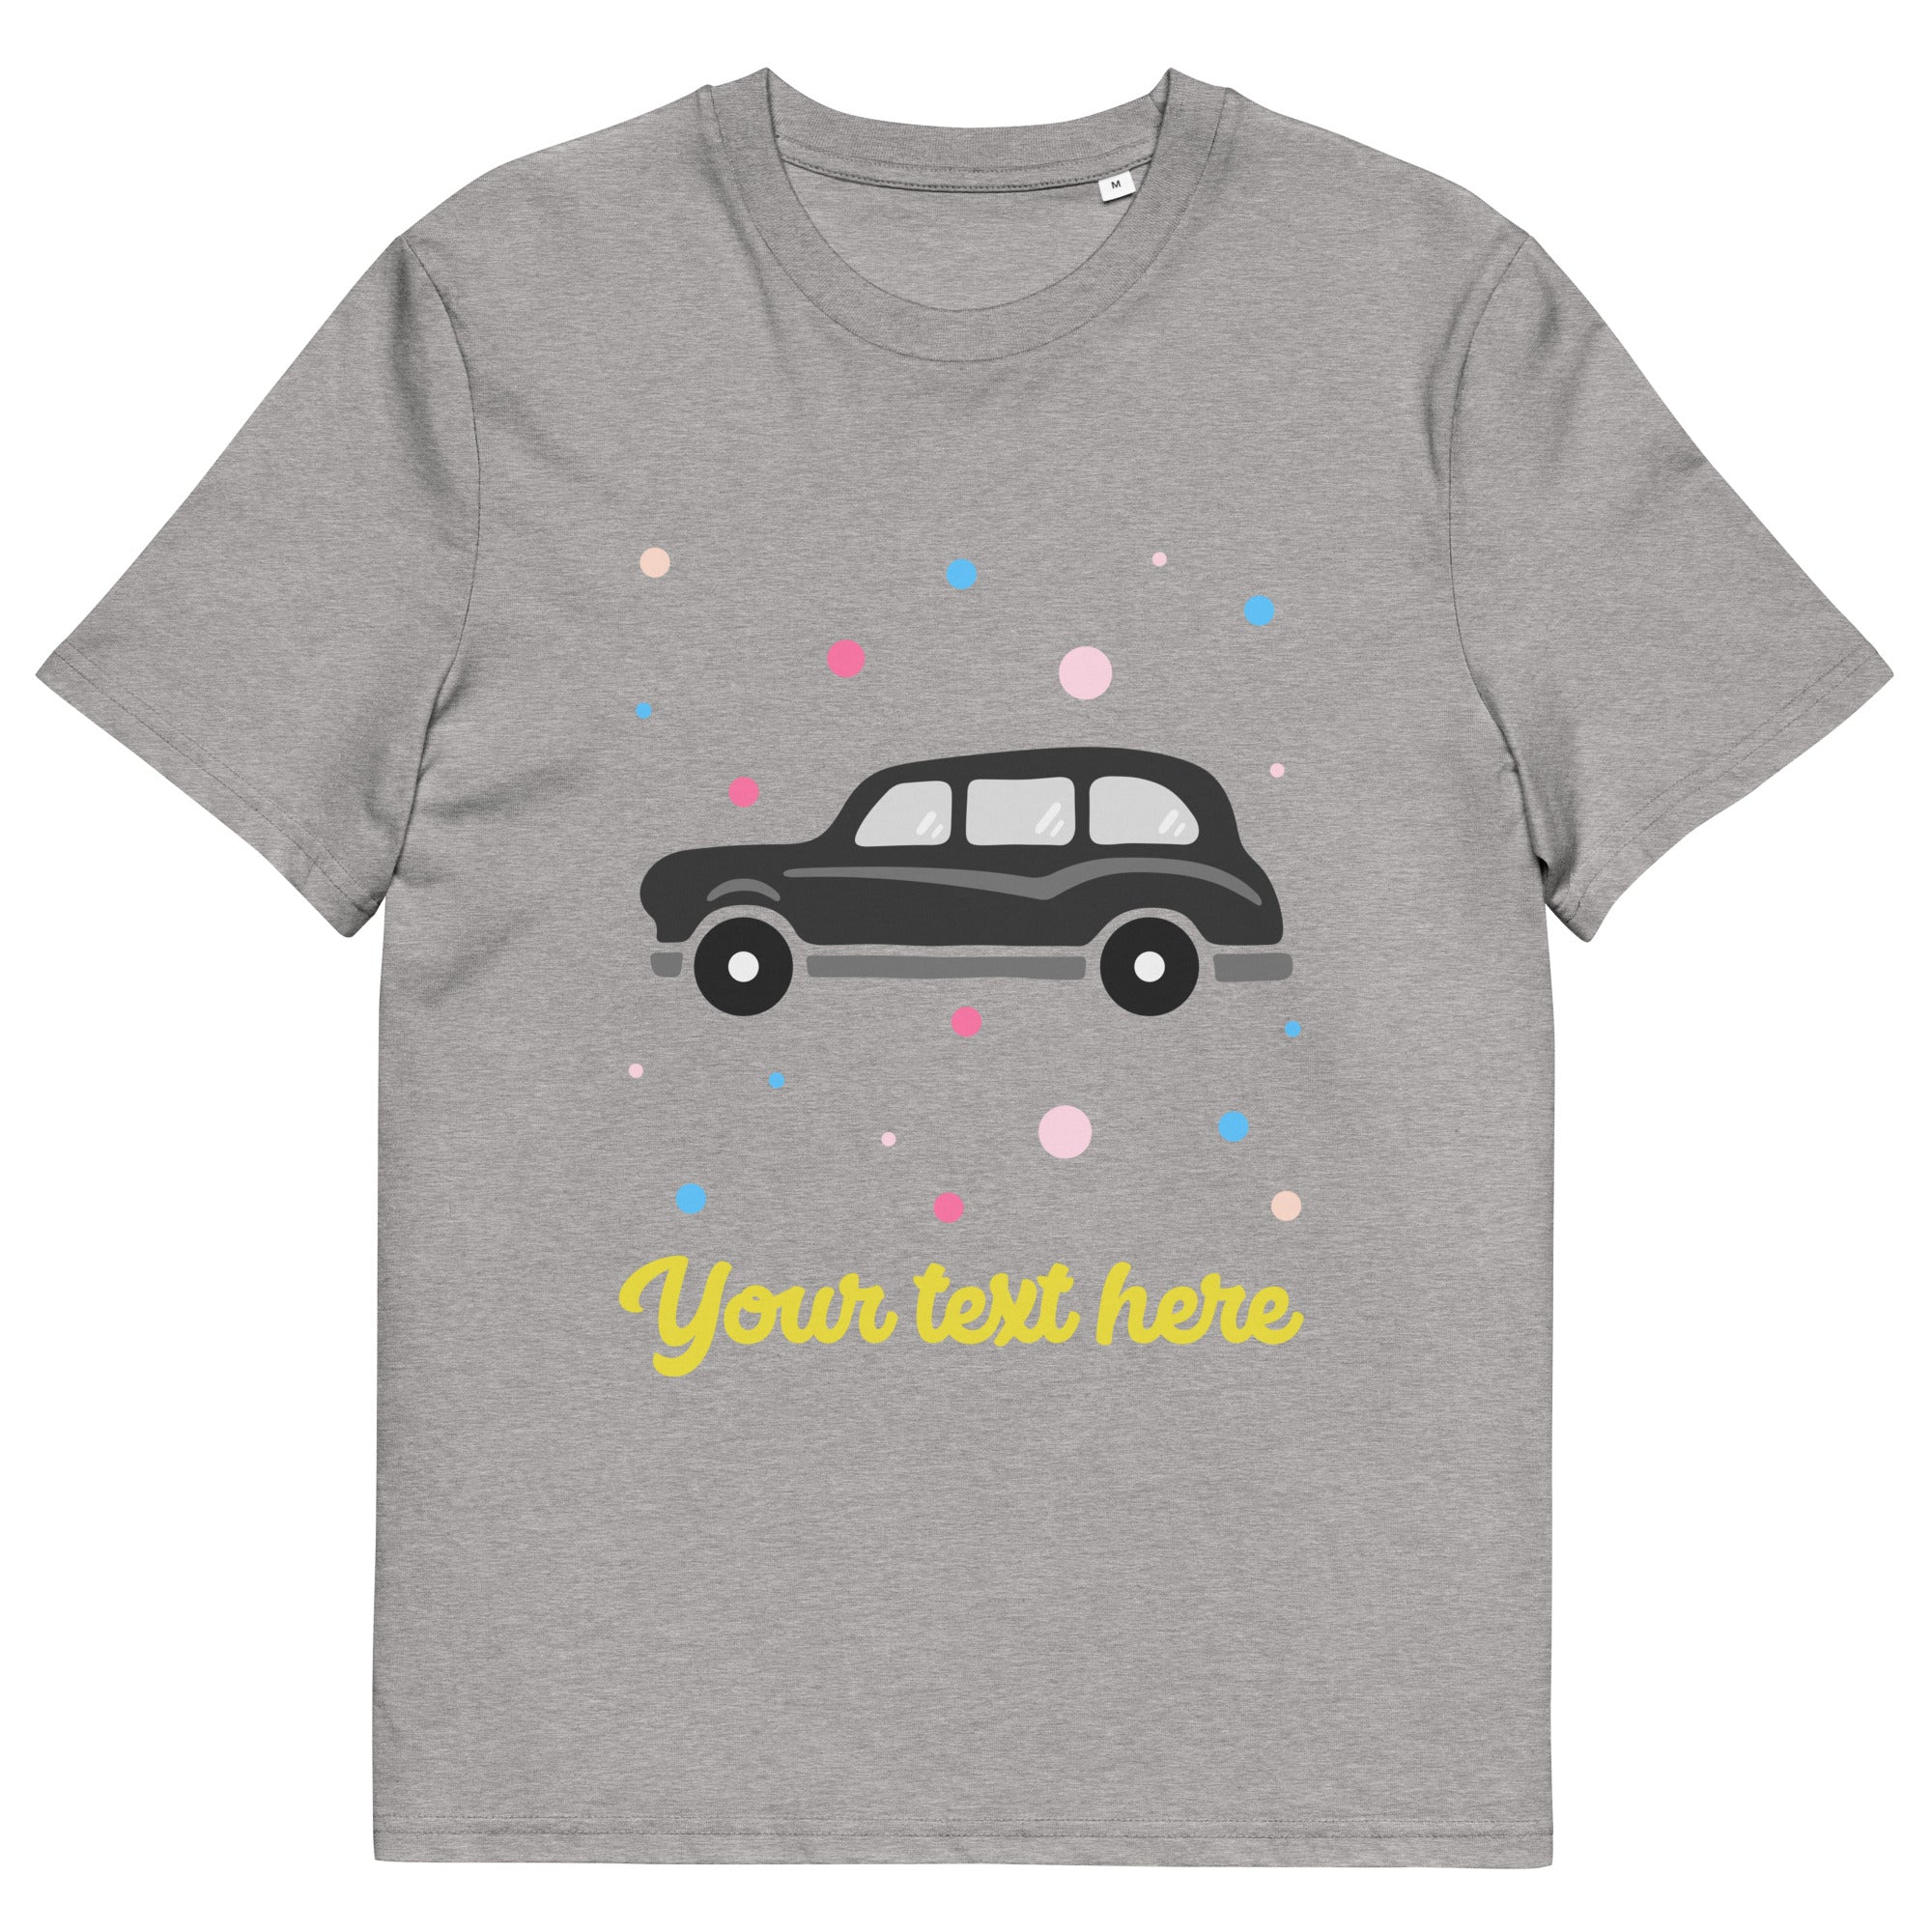 Personalised Custom Text - Organic Cotton Adults Unisex T-Shirt - London Doodles - Black Taxi - Heather Grey